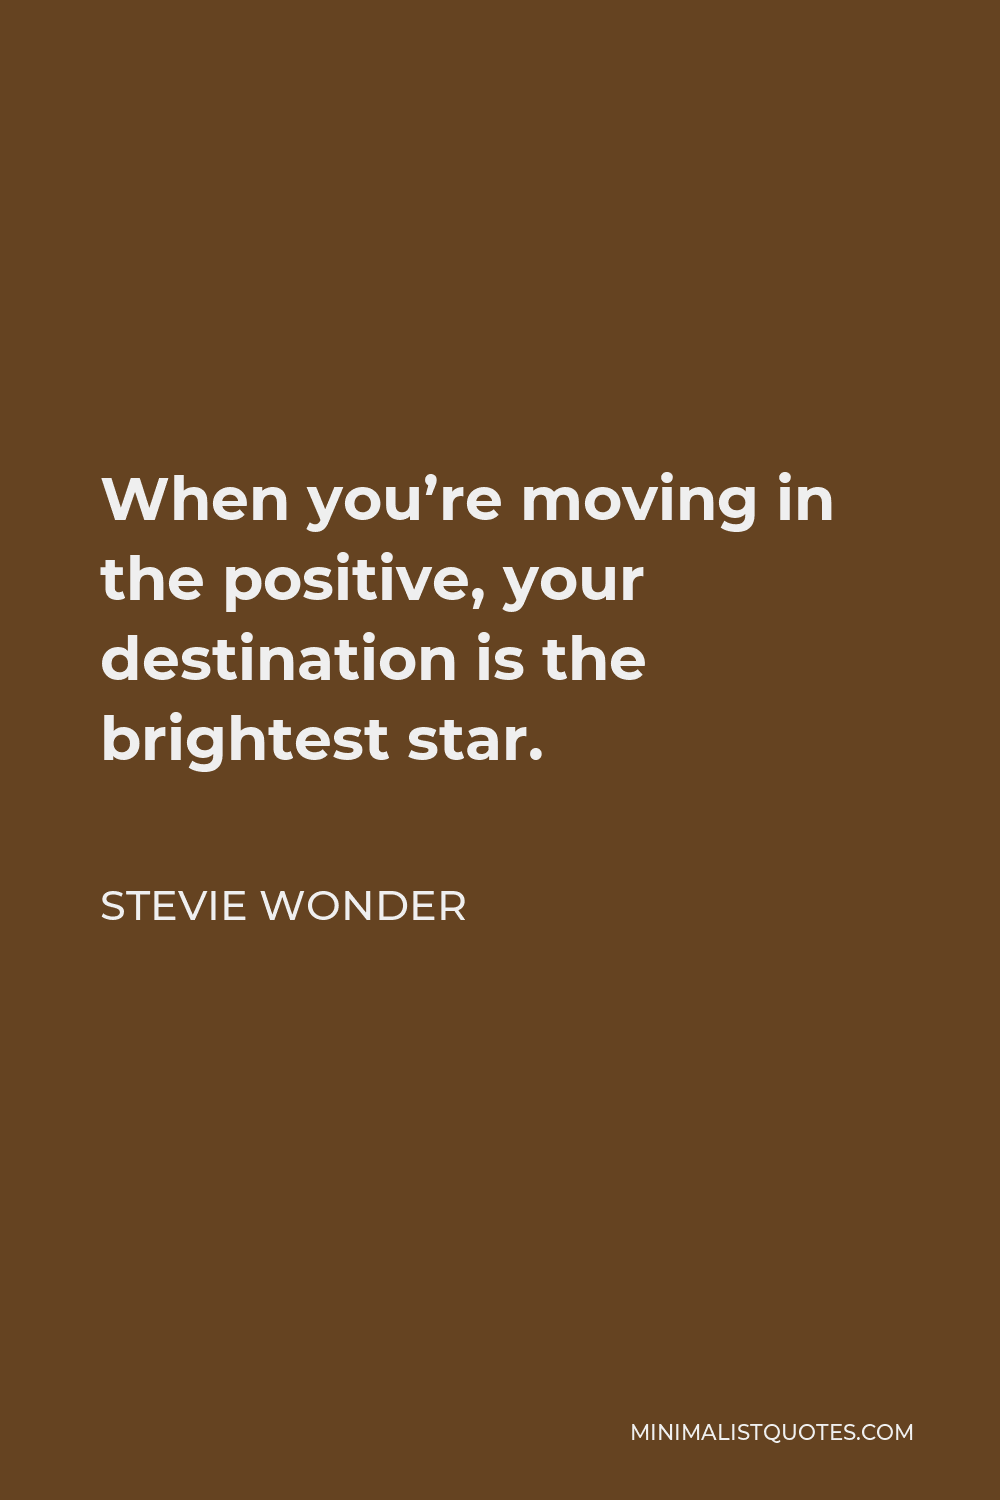 Stevie Wonder Quote - When you’re moving in the positive, your destination is the brightest star.